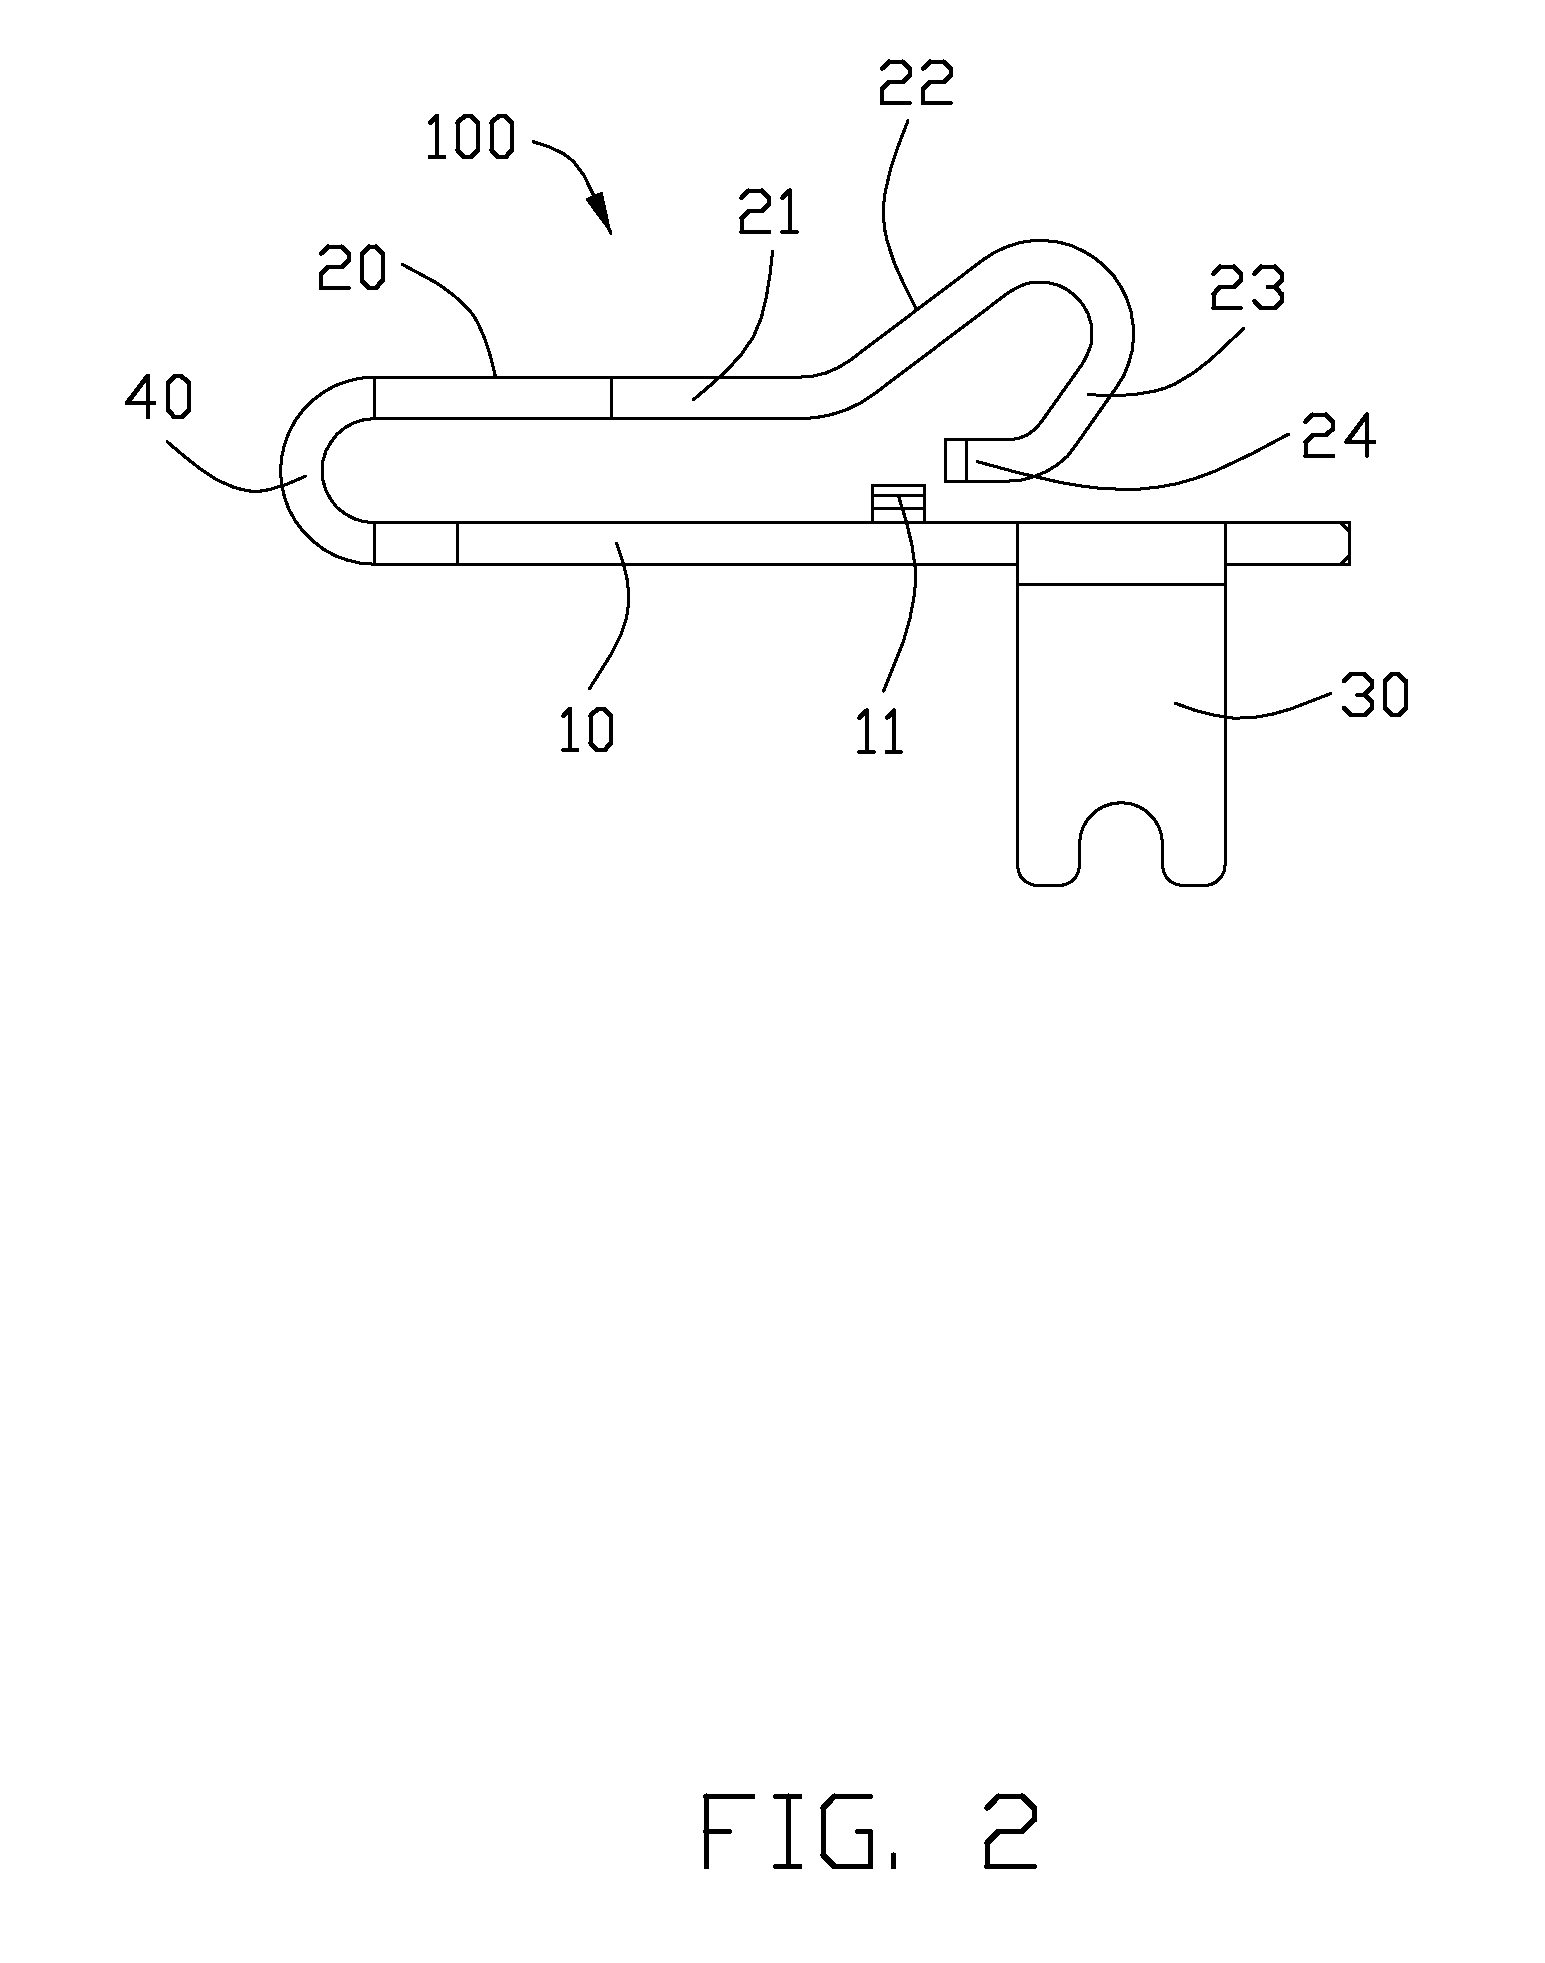 Audio jack connector having low insertion force and high ejection force